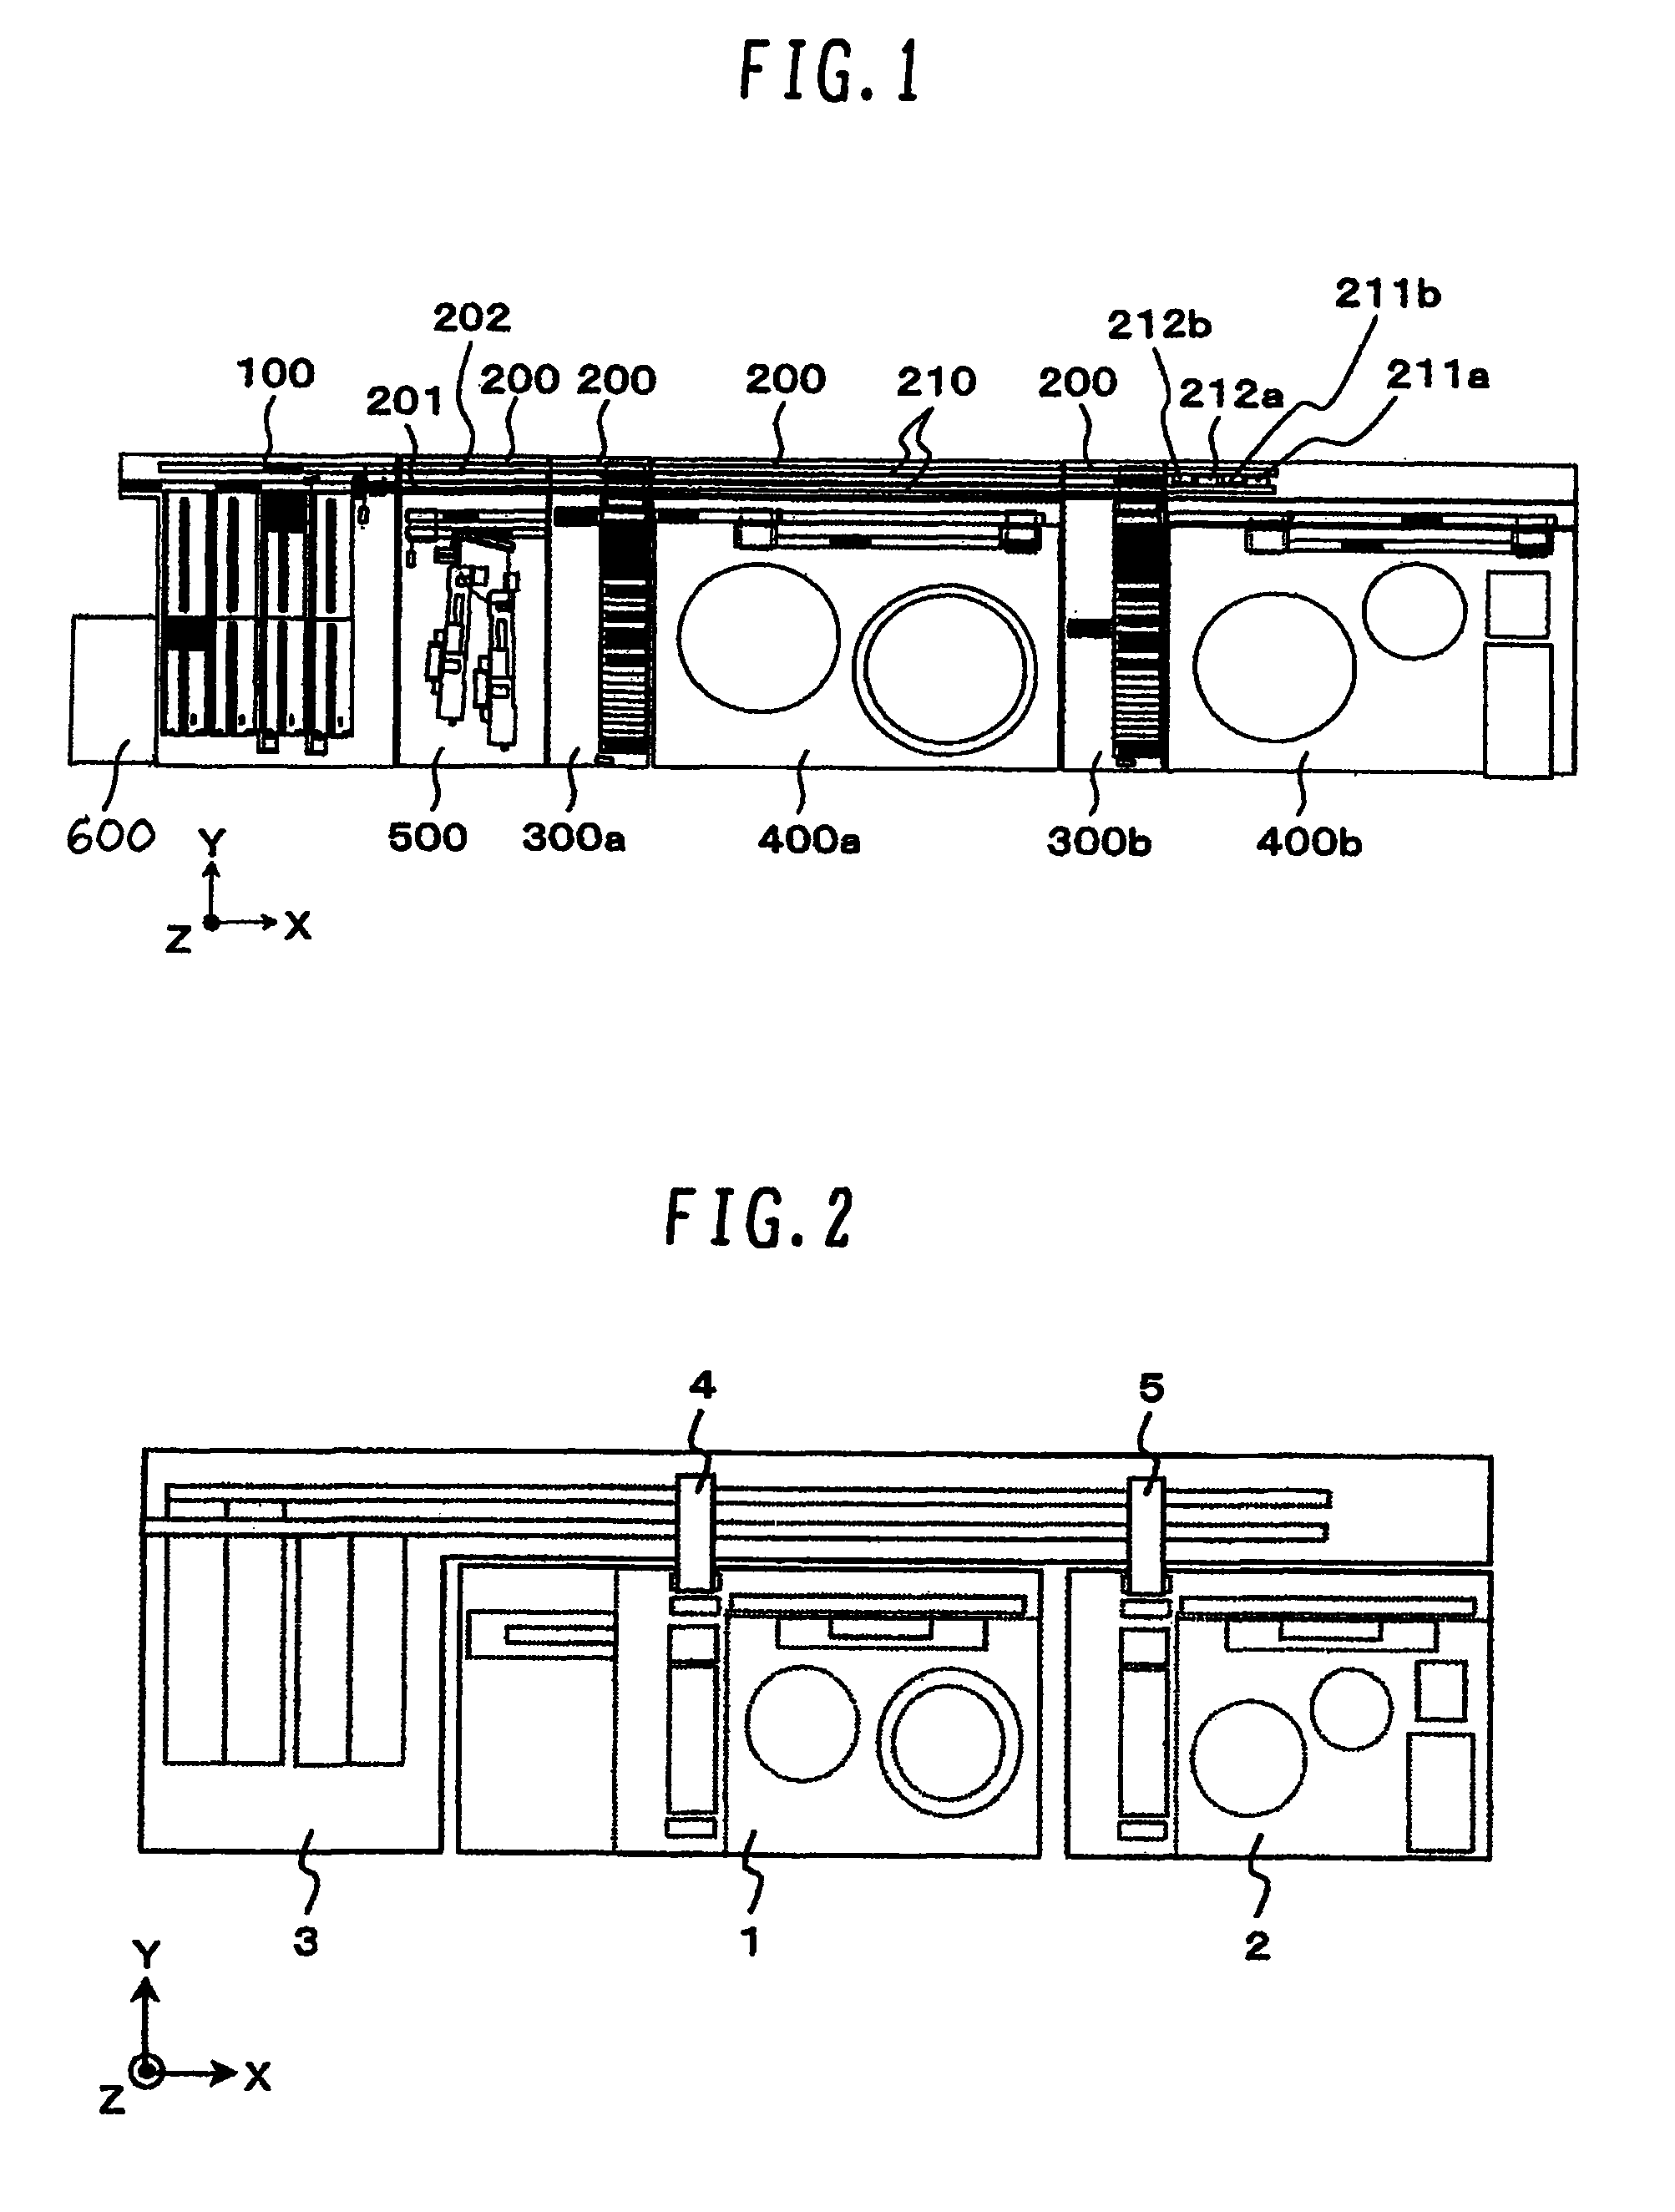 Automatic analyzer and sample-processing system